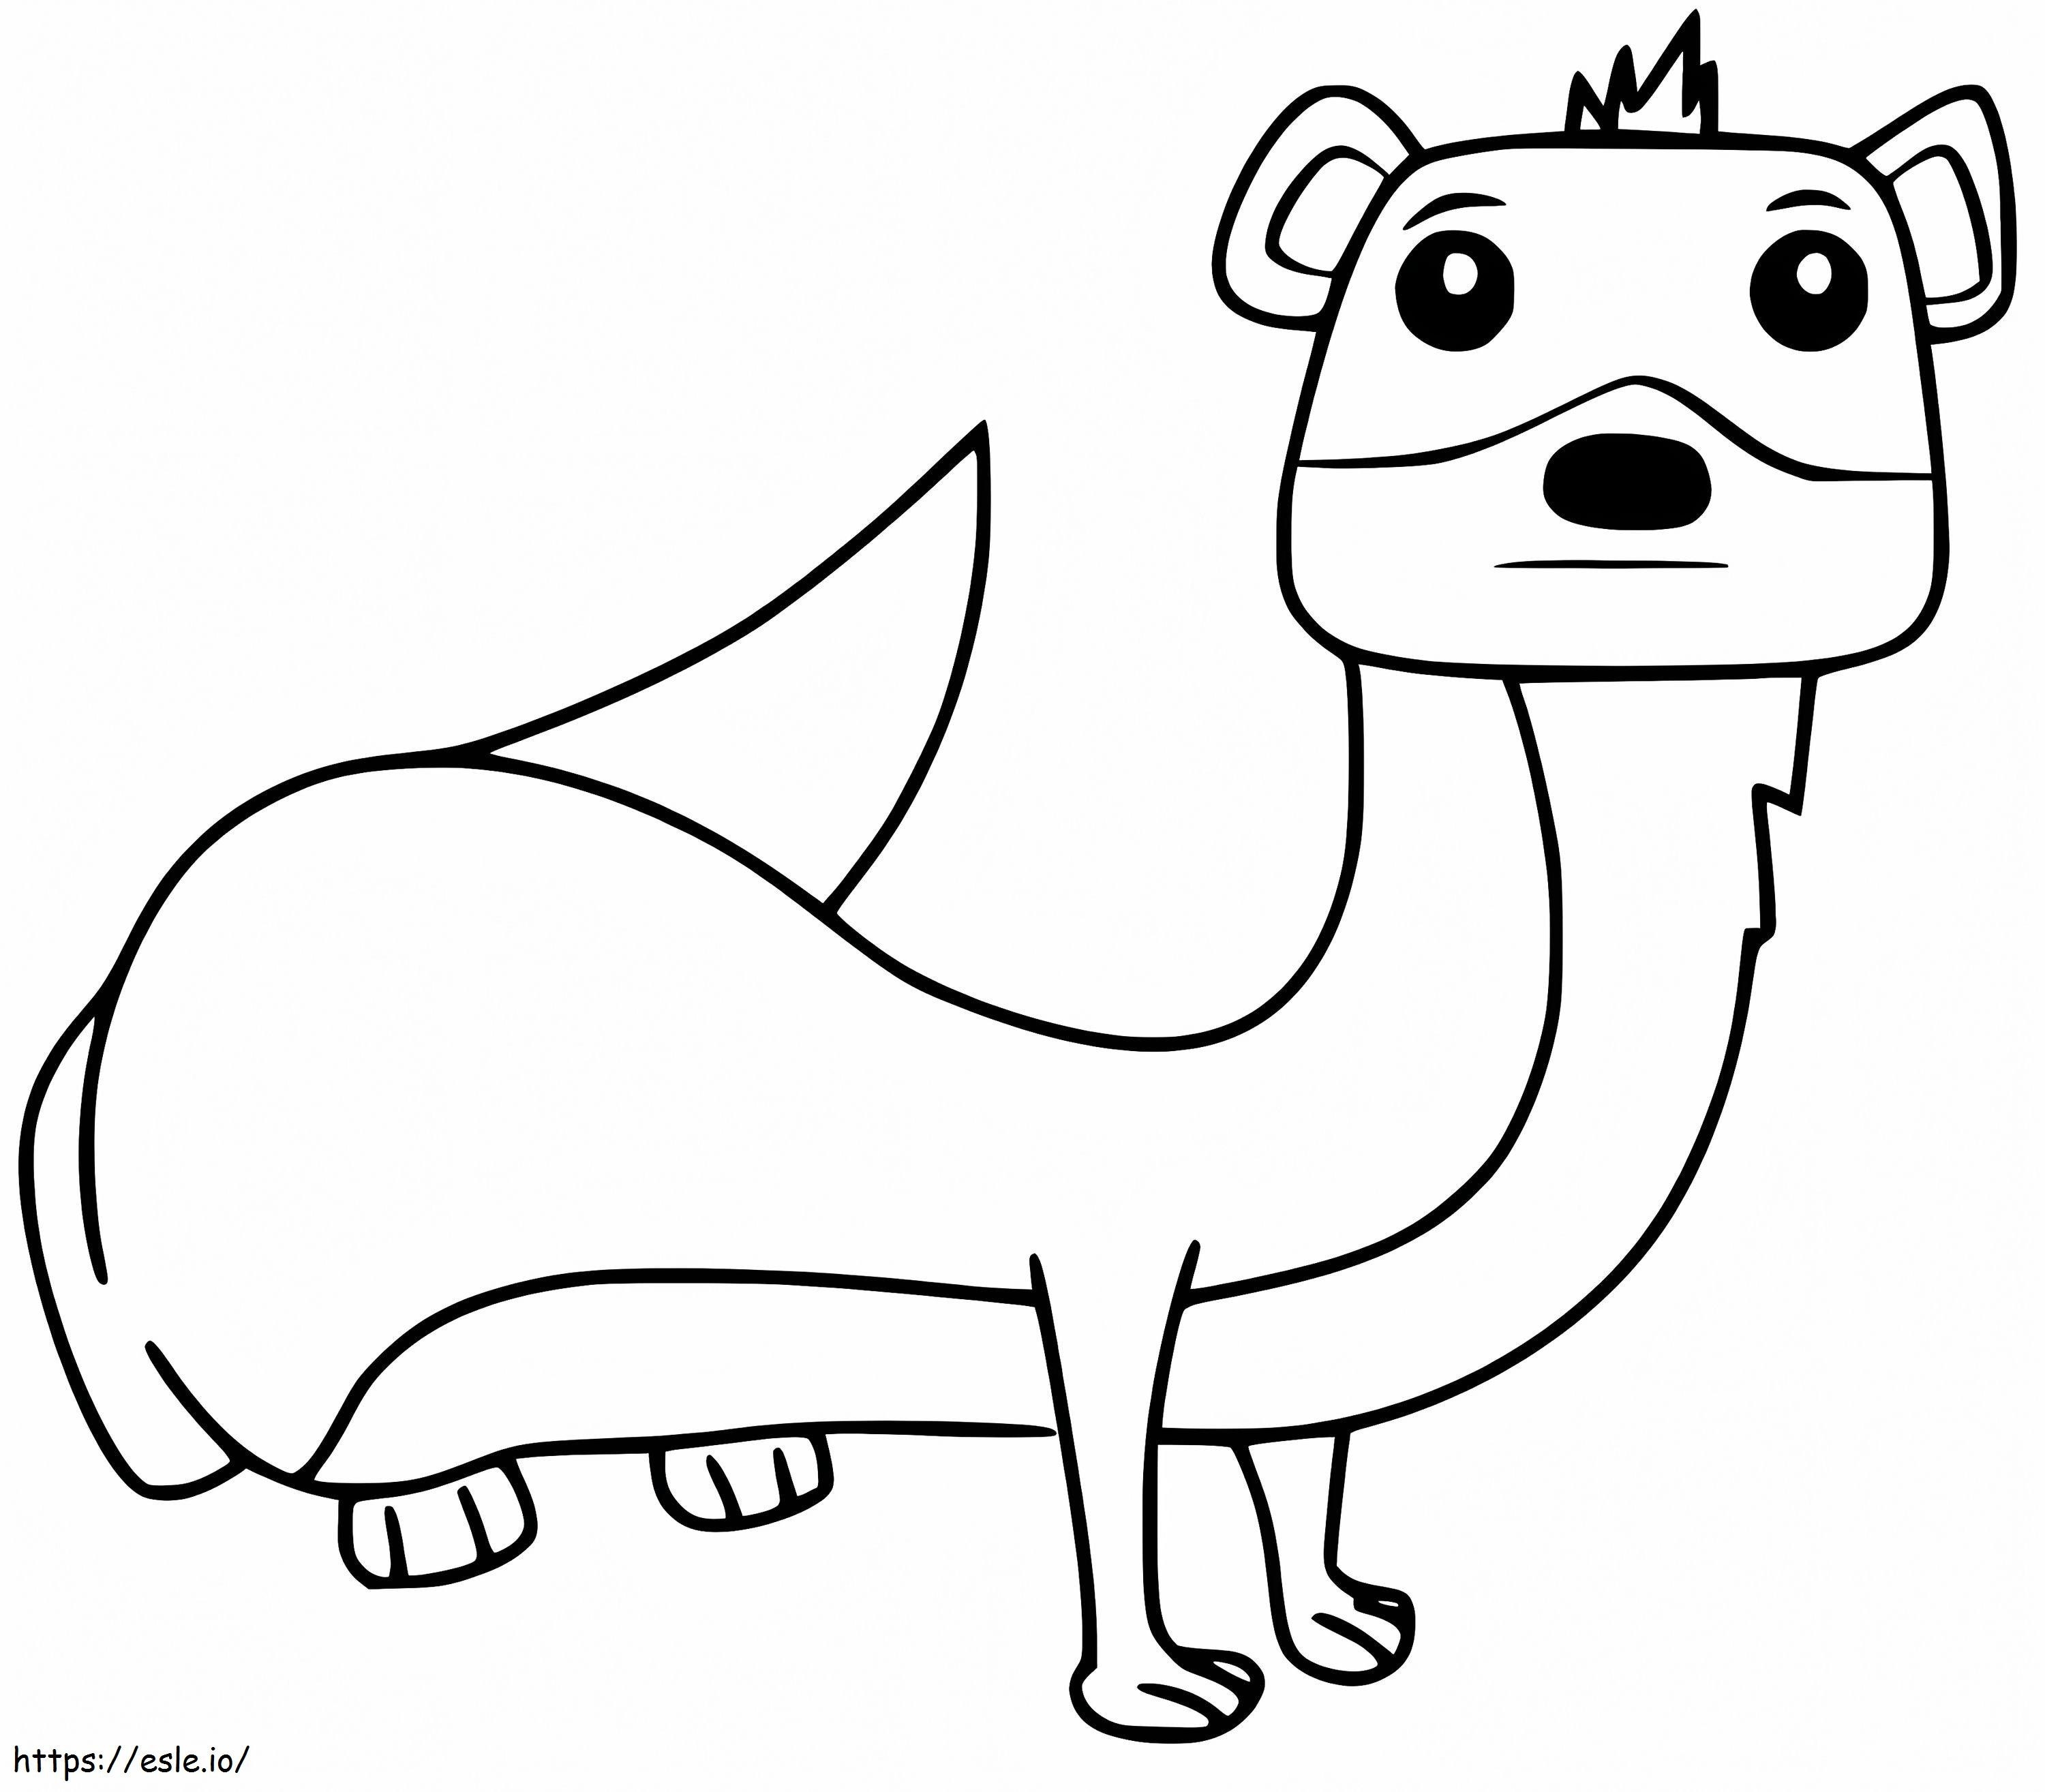 Animated Weasel coloring page